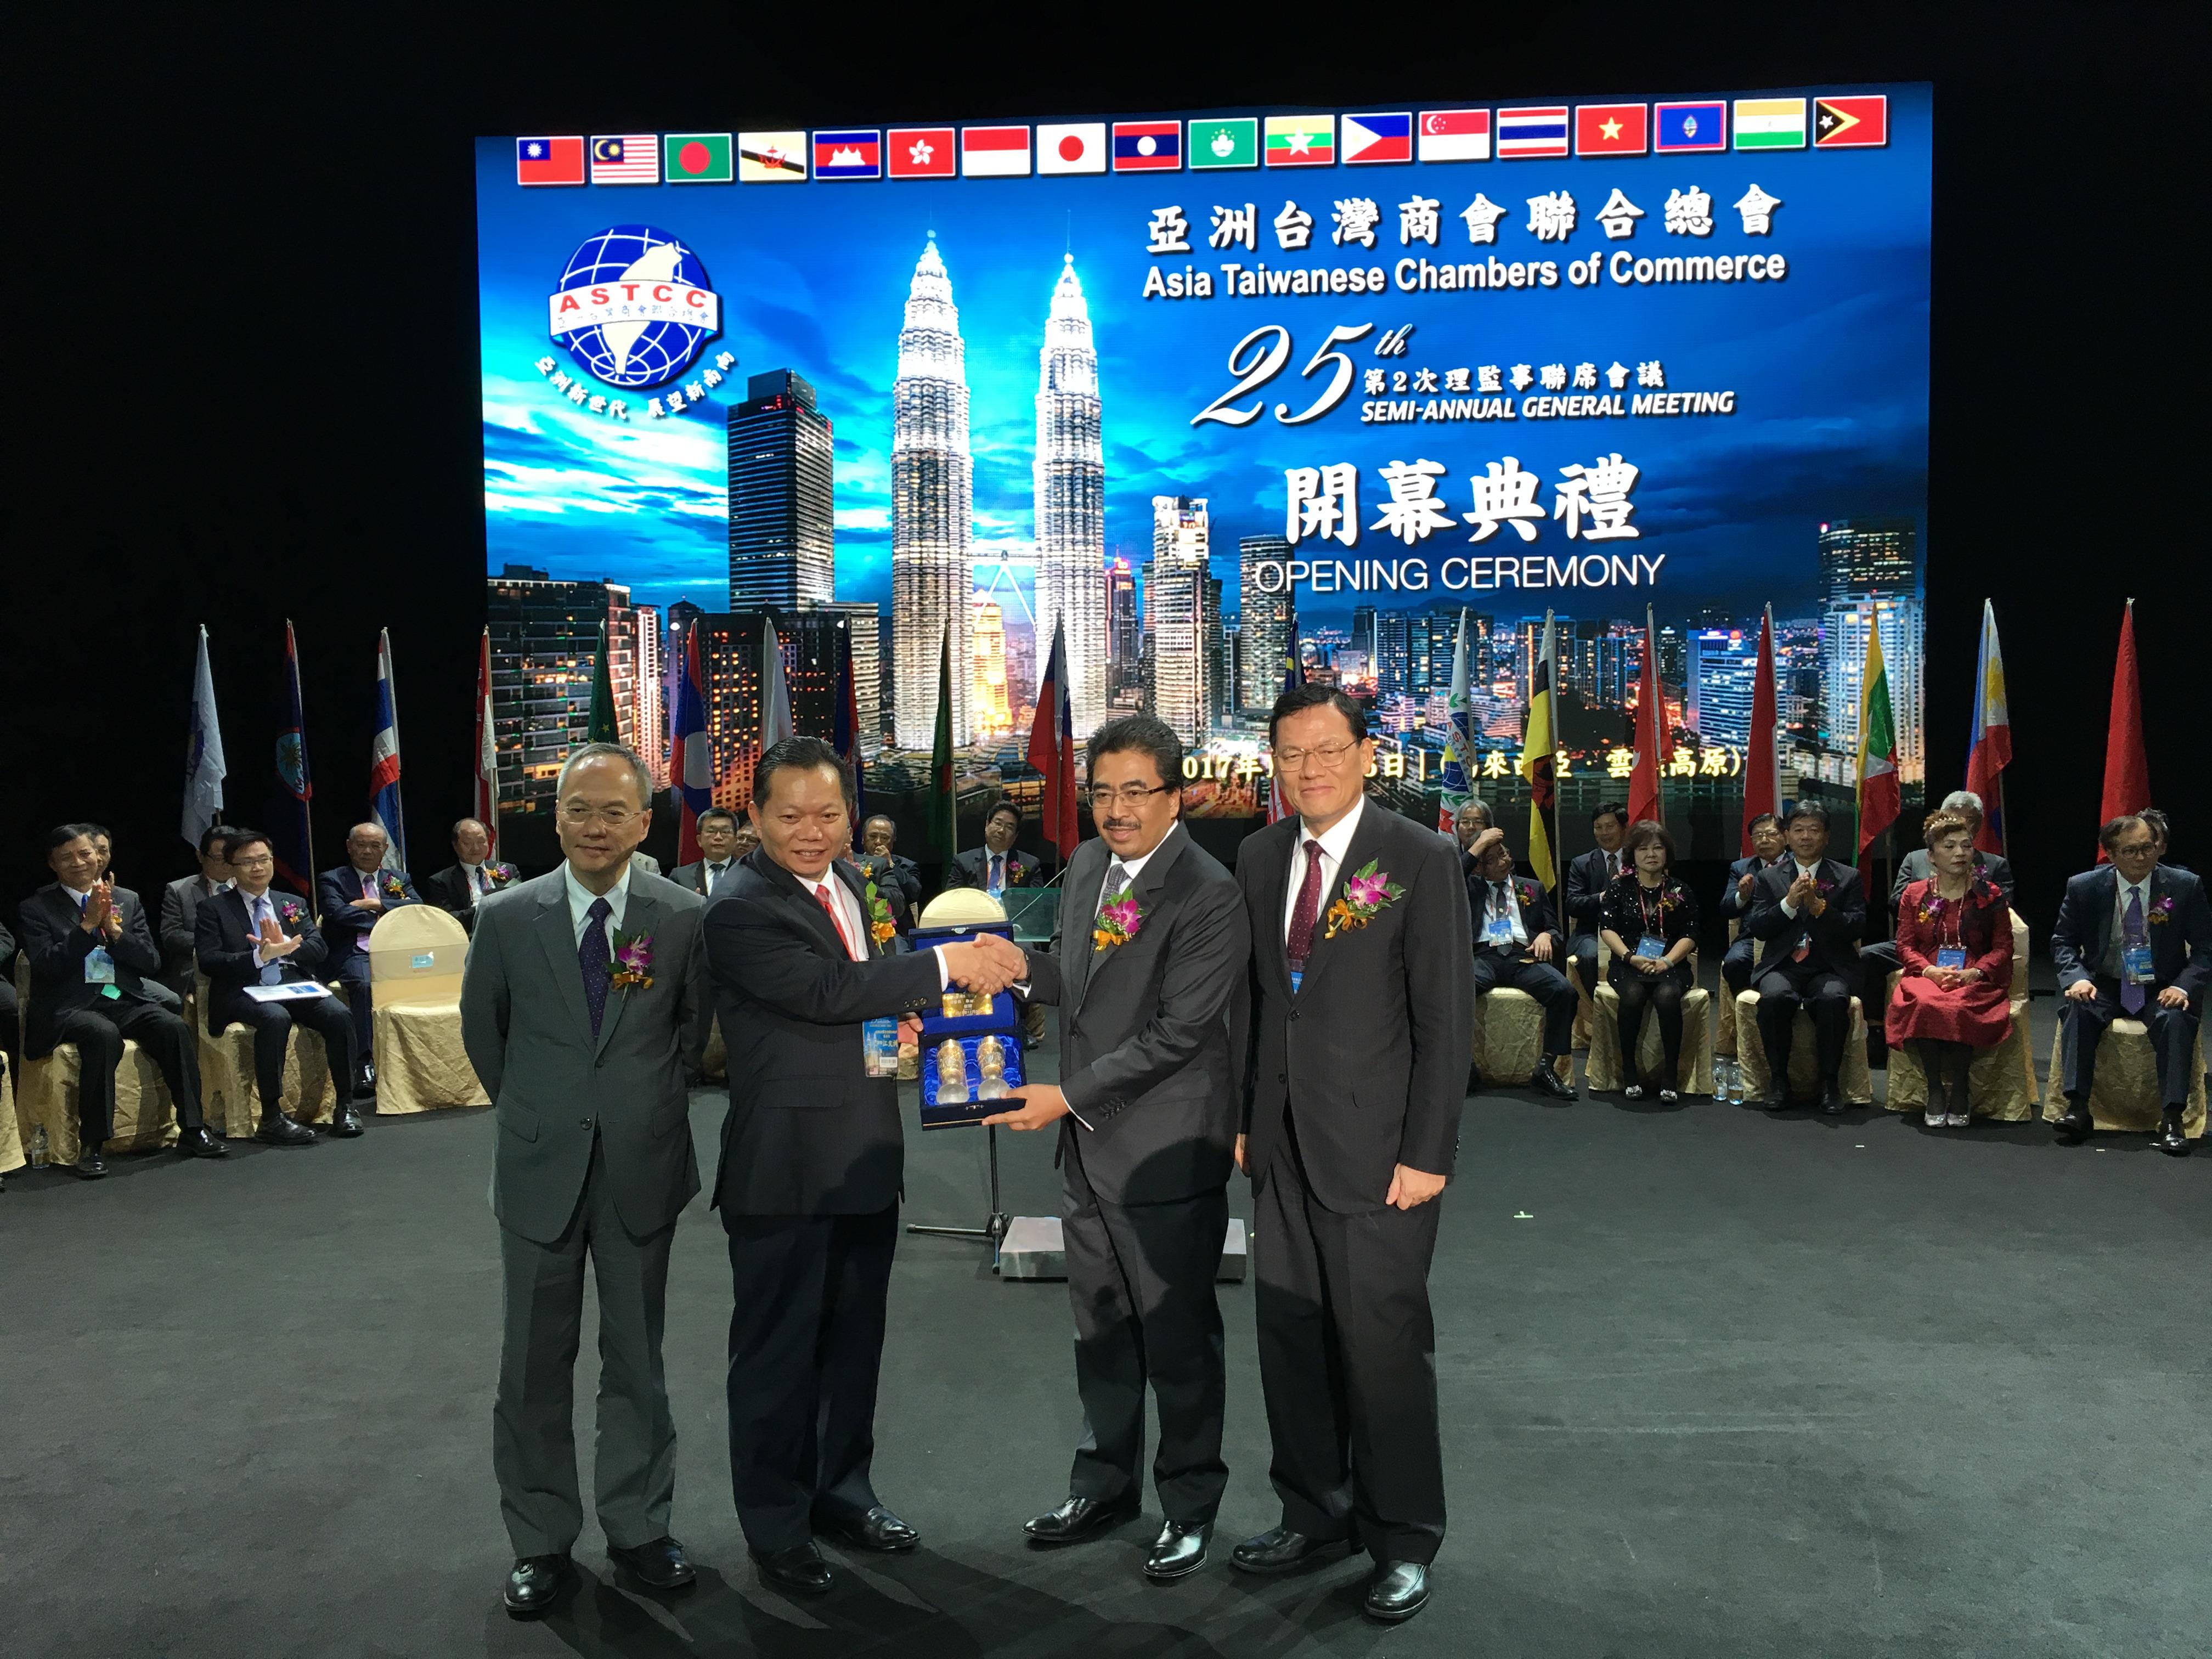 Representative Chang, James Chi-ping (right first) take photos with the behalf of Prime Minister, Johari Abdul Ghani (right second), president of Asia Taiwanese Chambers of Commerce, Dato’ Allen Chiang (left second) and head of Overseas Community Affairs Council, Wu Xin Xing (left first).
